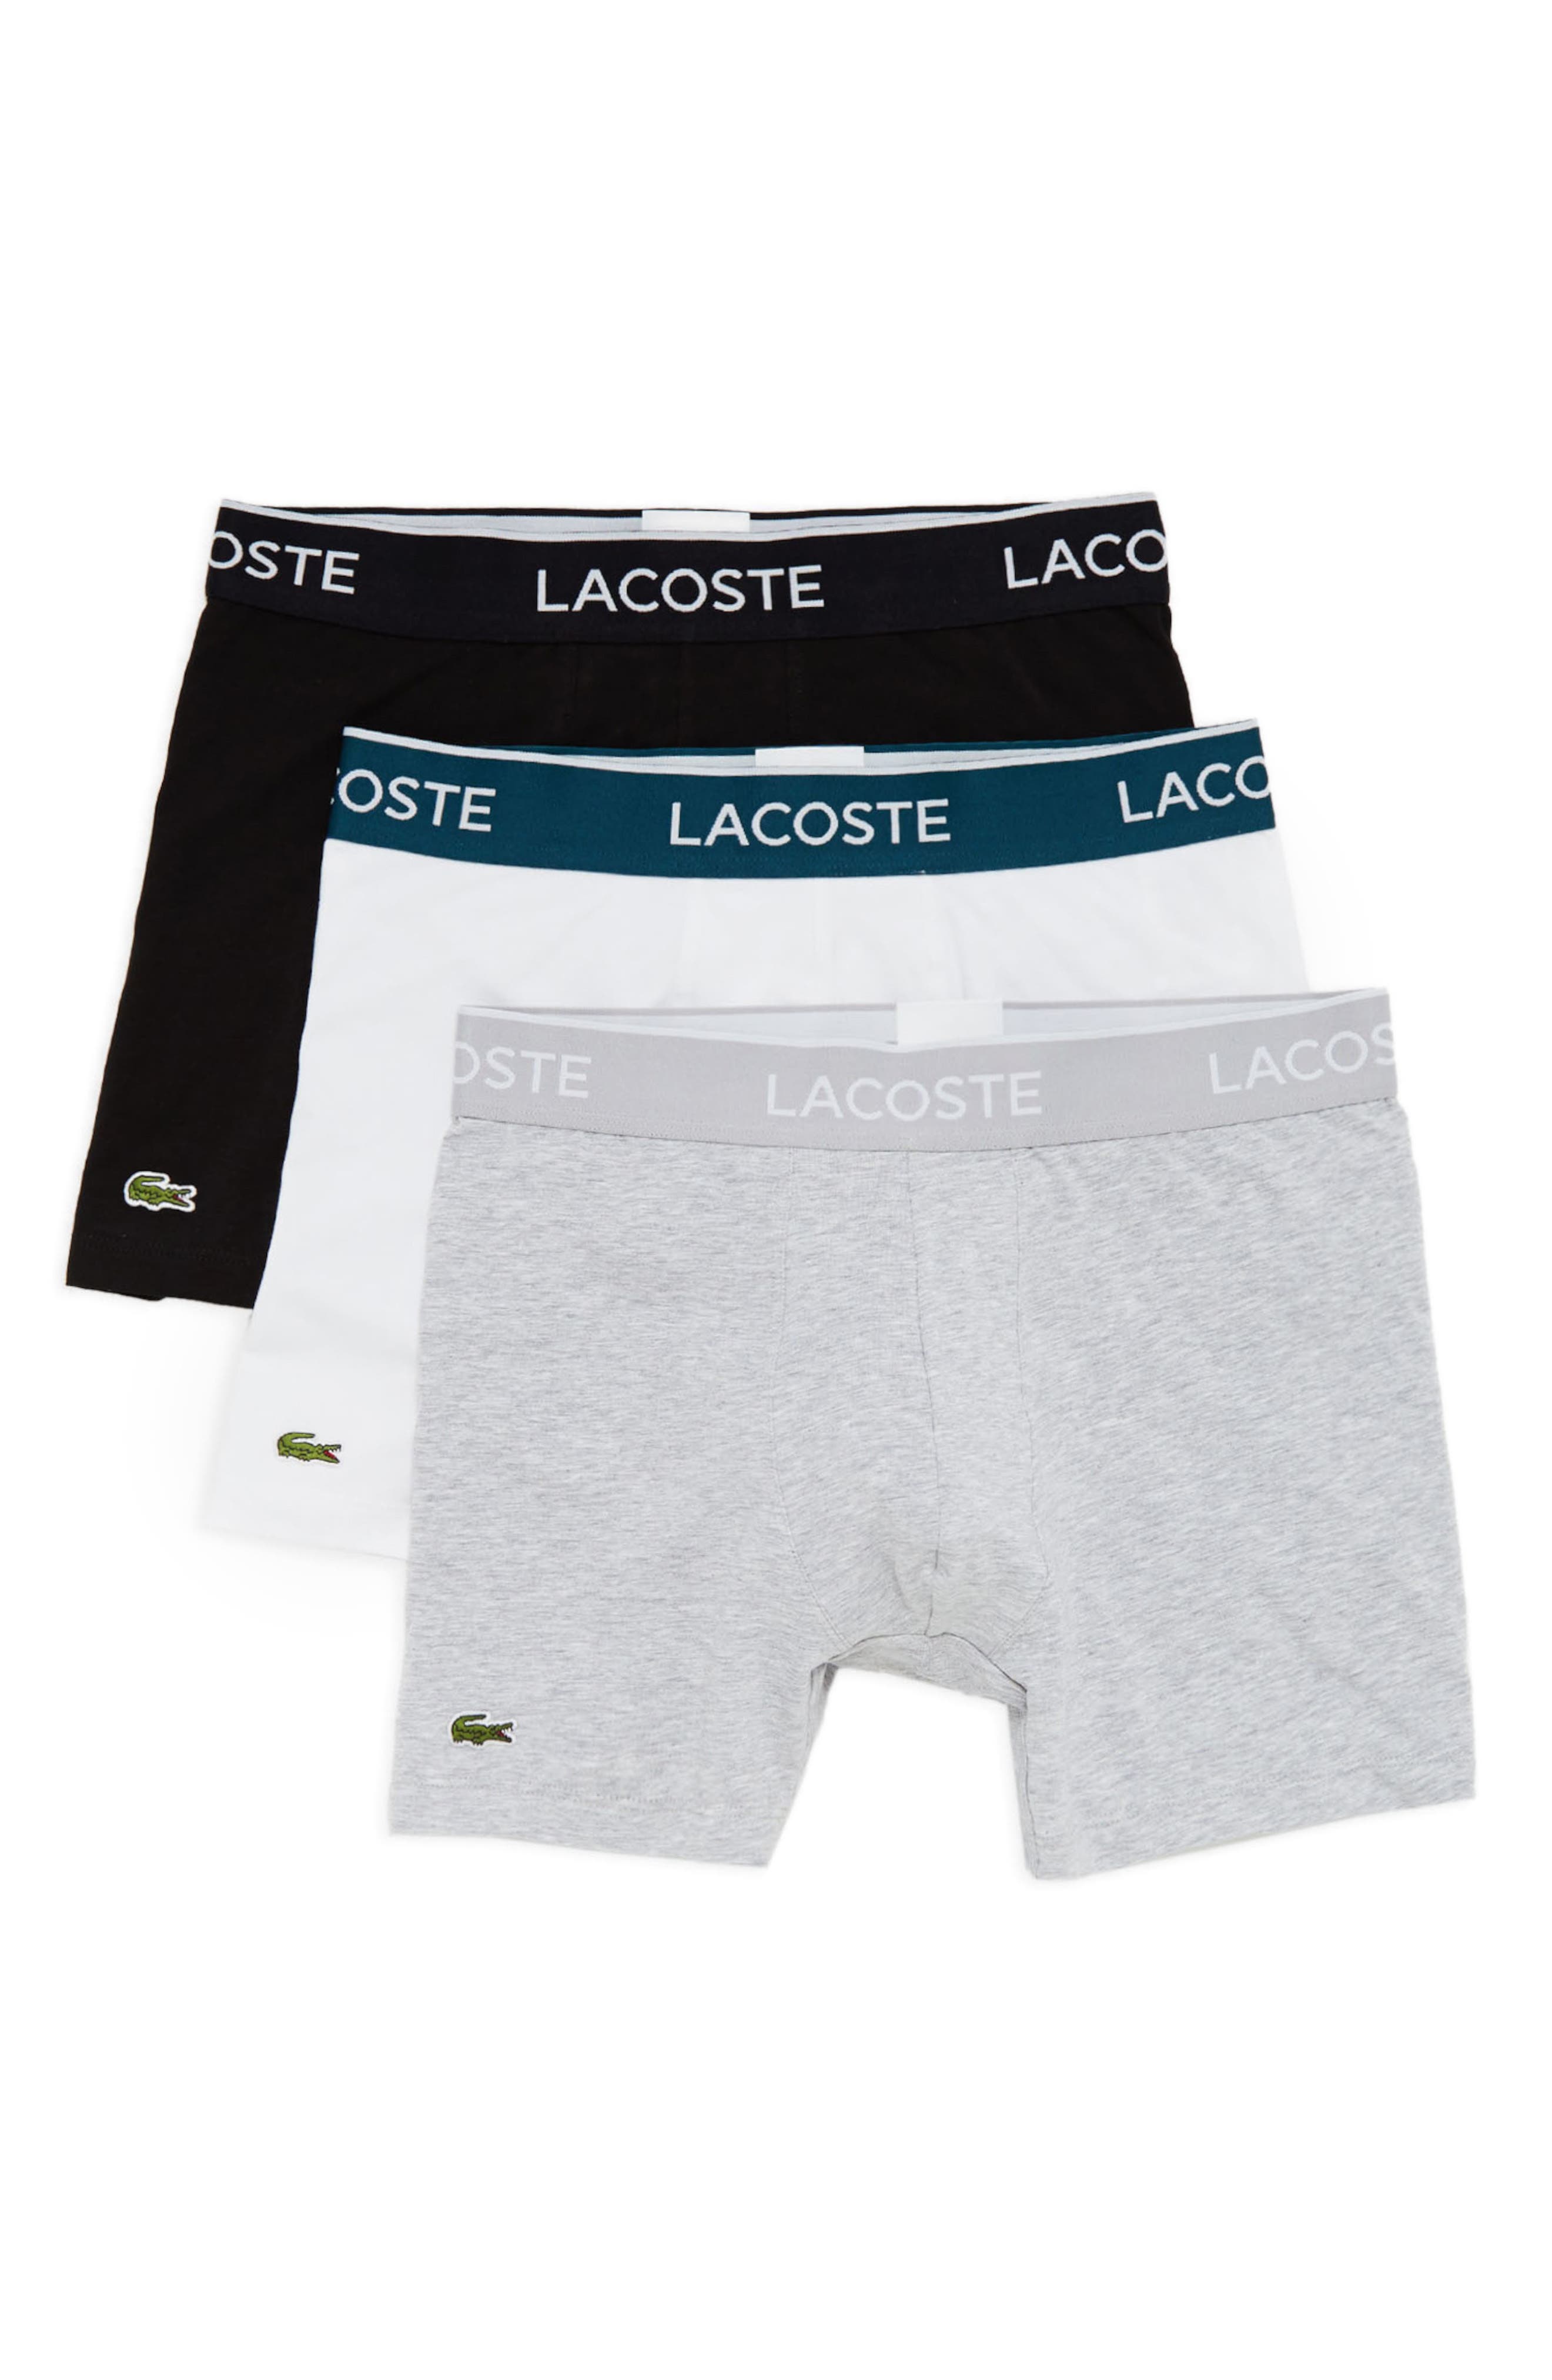 LACOSTE MENS PACK OF 2 COTTON STRETCH BOXER SHORTS SMALL RRP:-£40